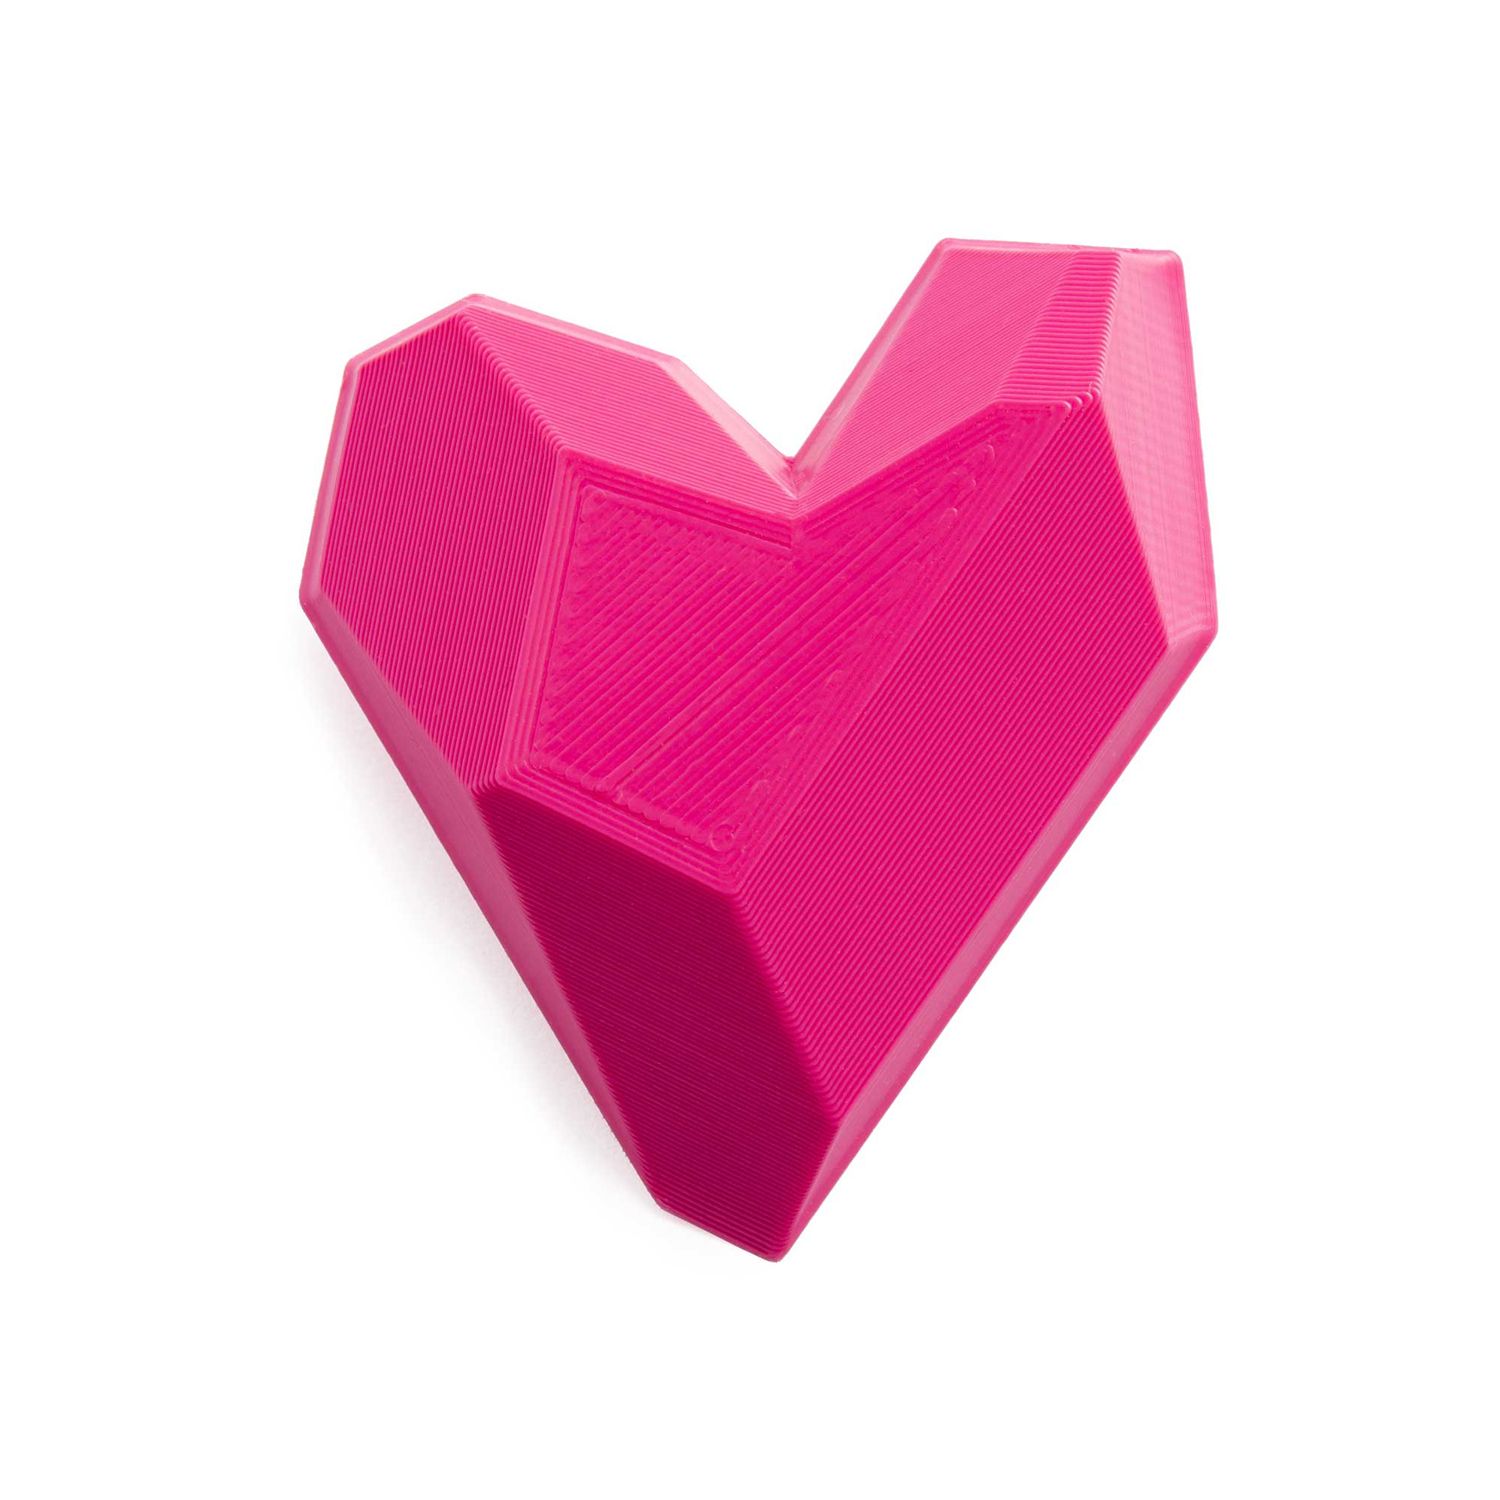 Maison 203: Heart Brooch – Magenta Product Image 1 of 3